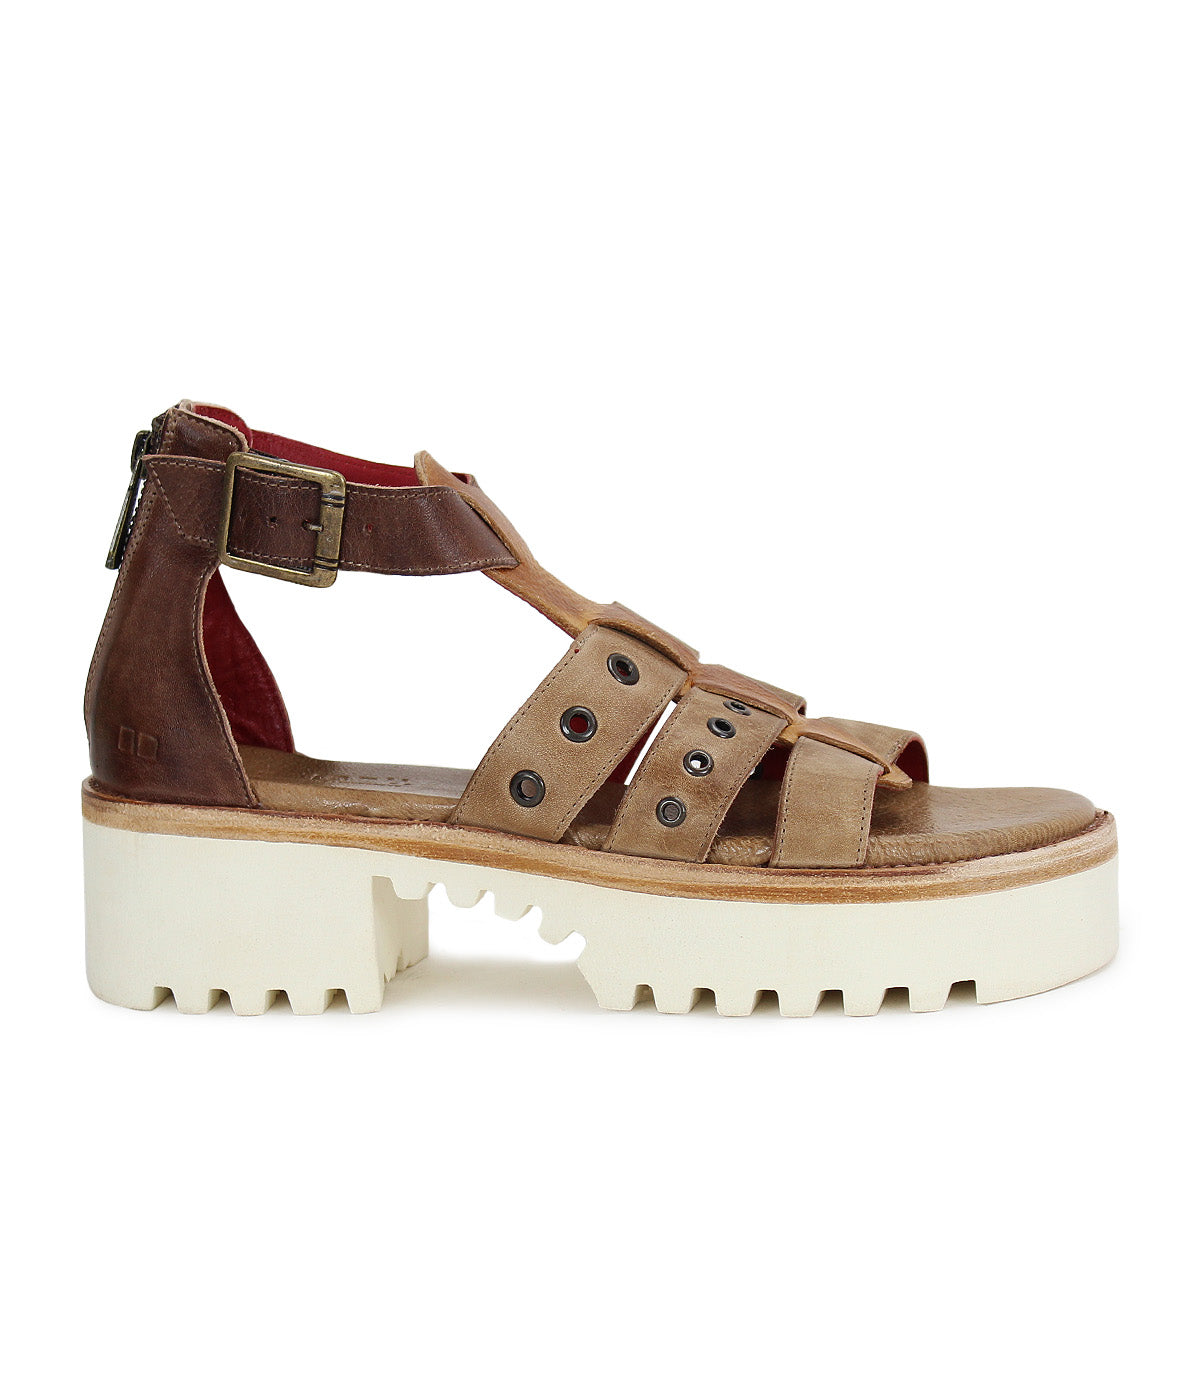 A women's Pacifica sandal by Bed Stu, with two straps and a white sole.